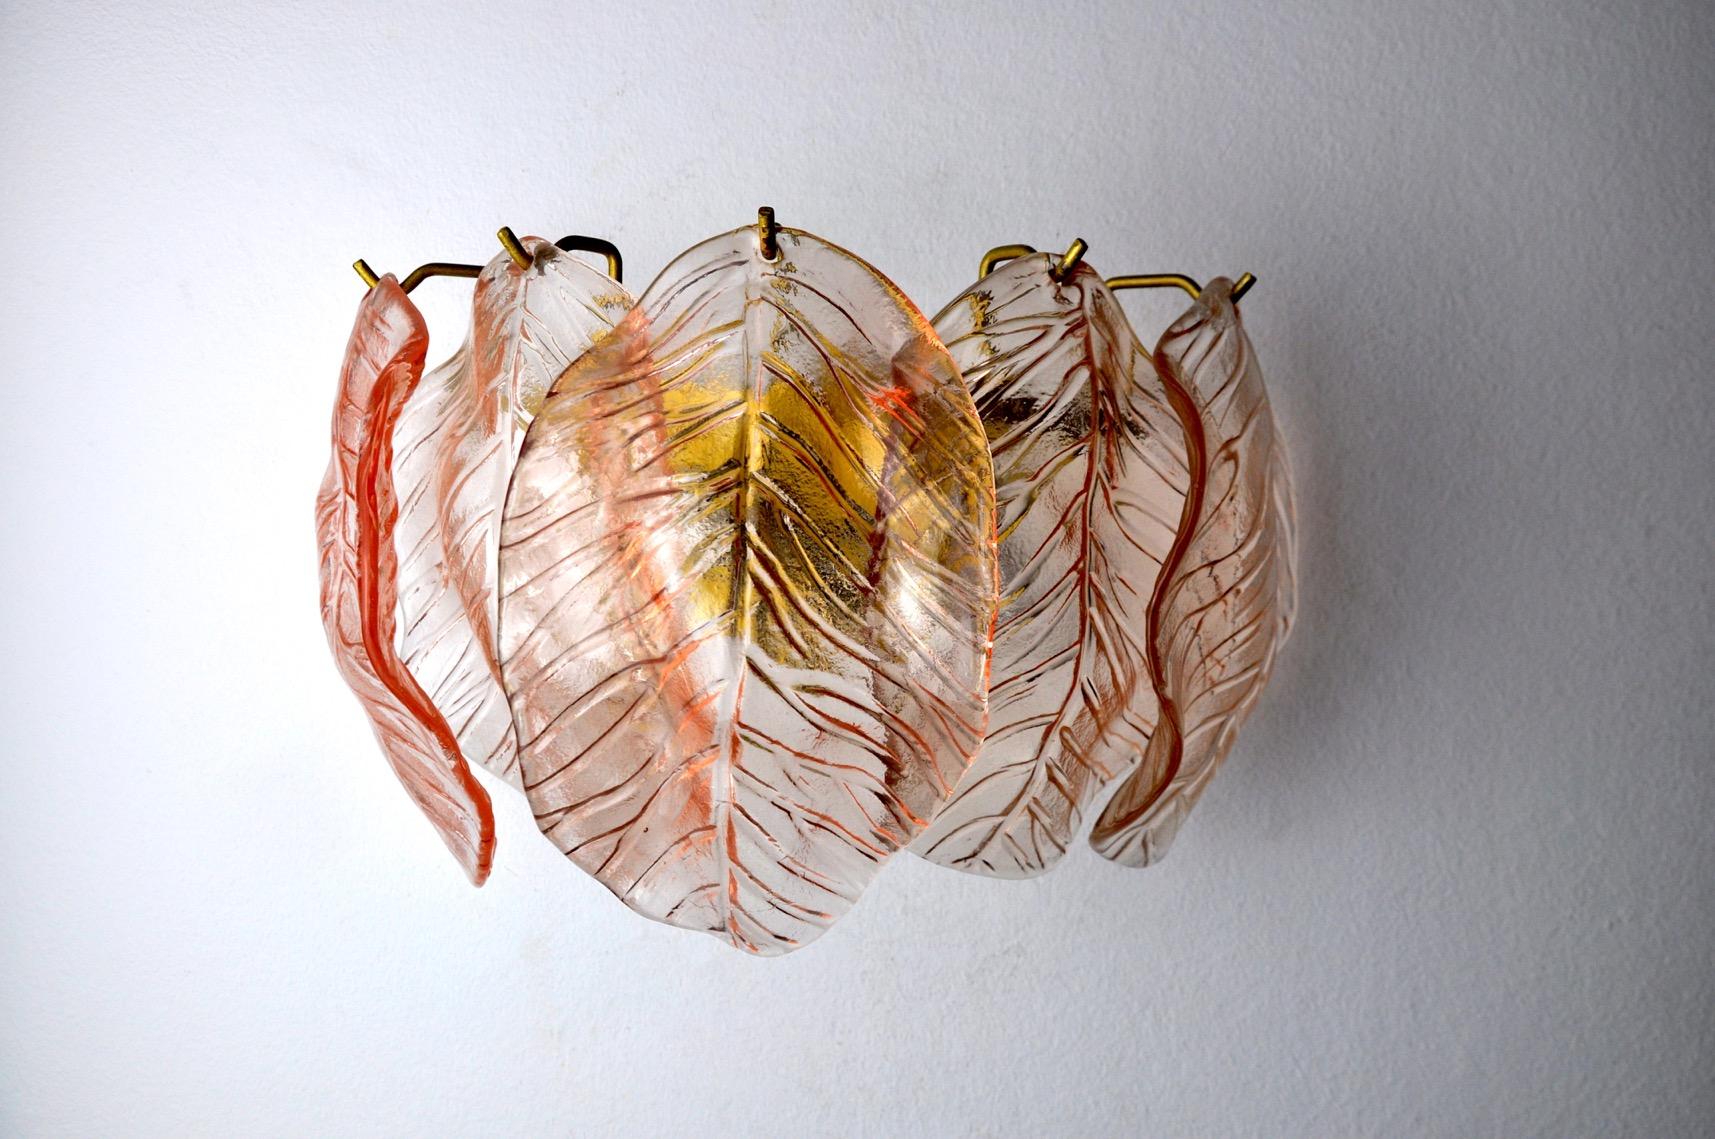 Very beautiful mazzega murano wall lamp produced in italy in the 70s. Murano glass crystals, pink leaf shape and gilded metal structure. Unique object that will illuminate wonderfully and bring a real design touch to your interior. Electricity